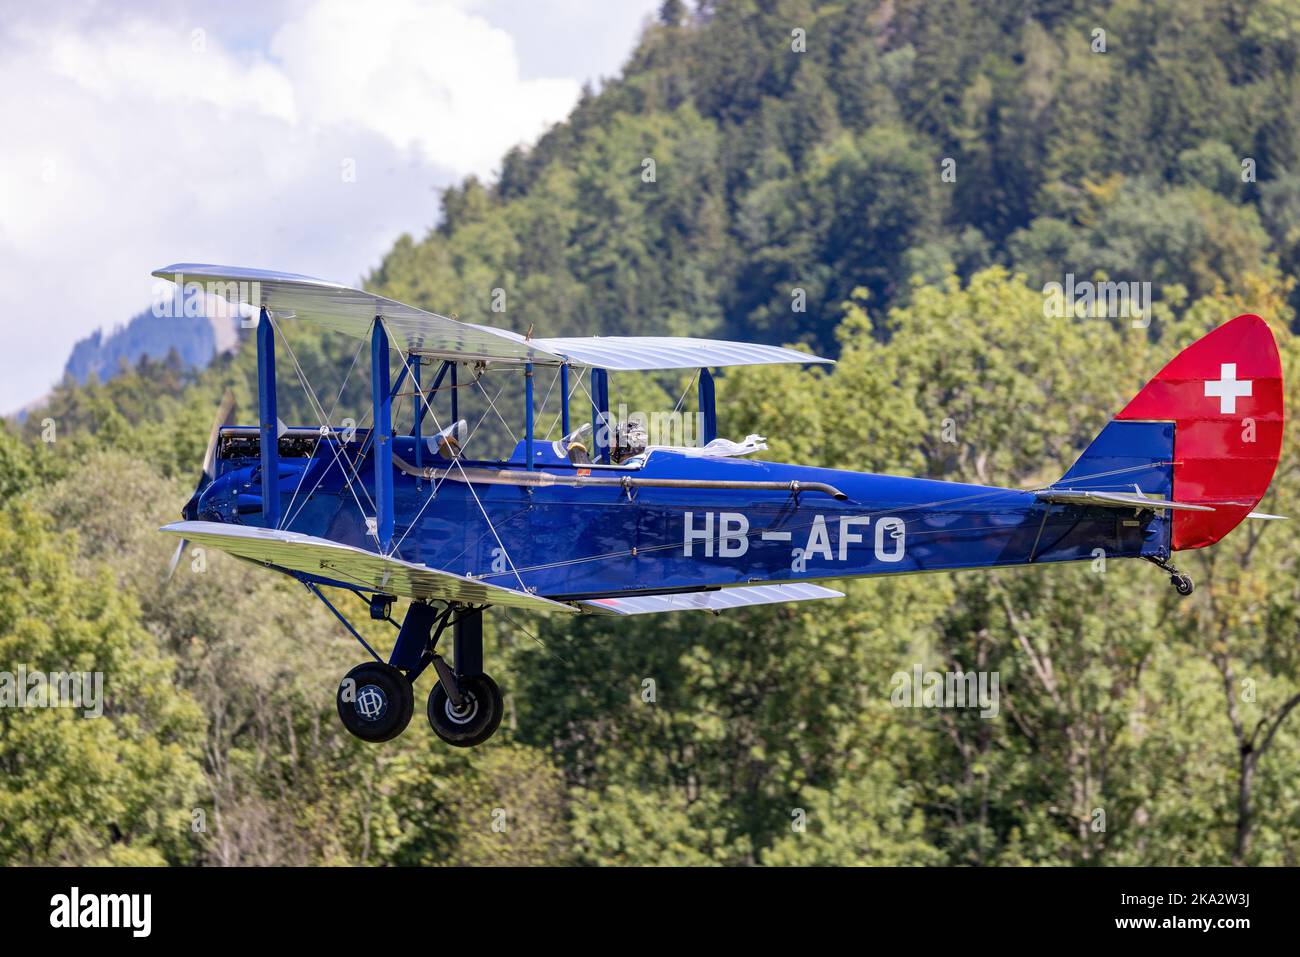 A view of the Gipsy Moth HB-AFO aircraft flying over the trees in Aerodrome Epagny Stock Photo